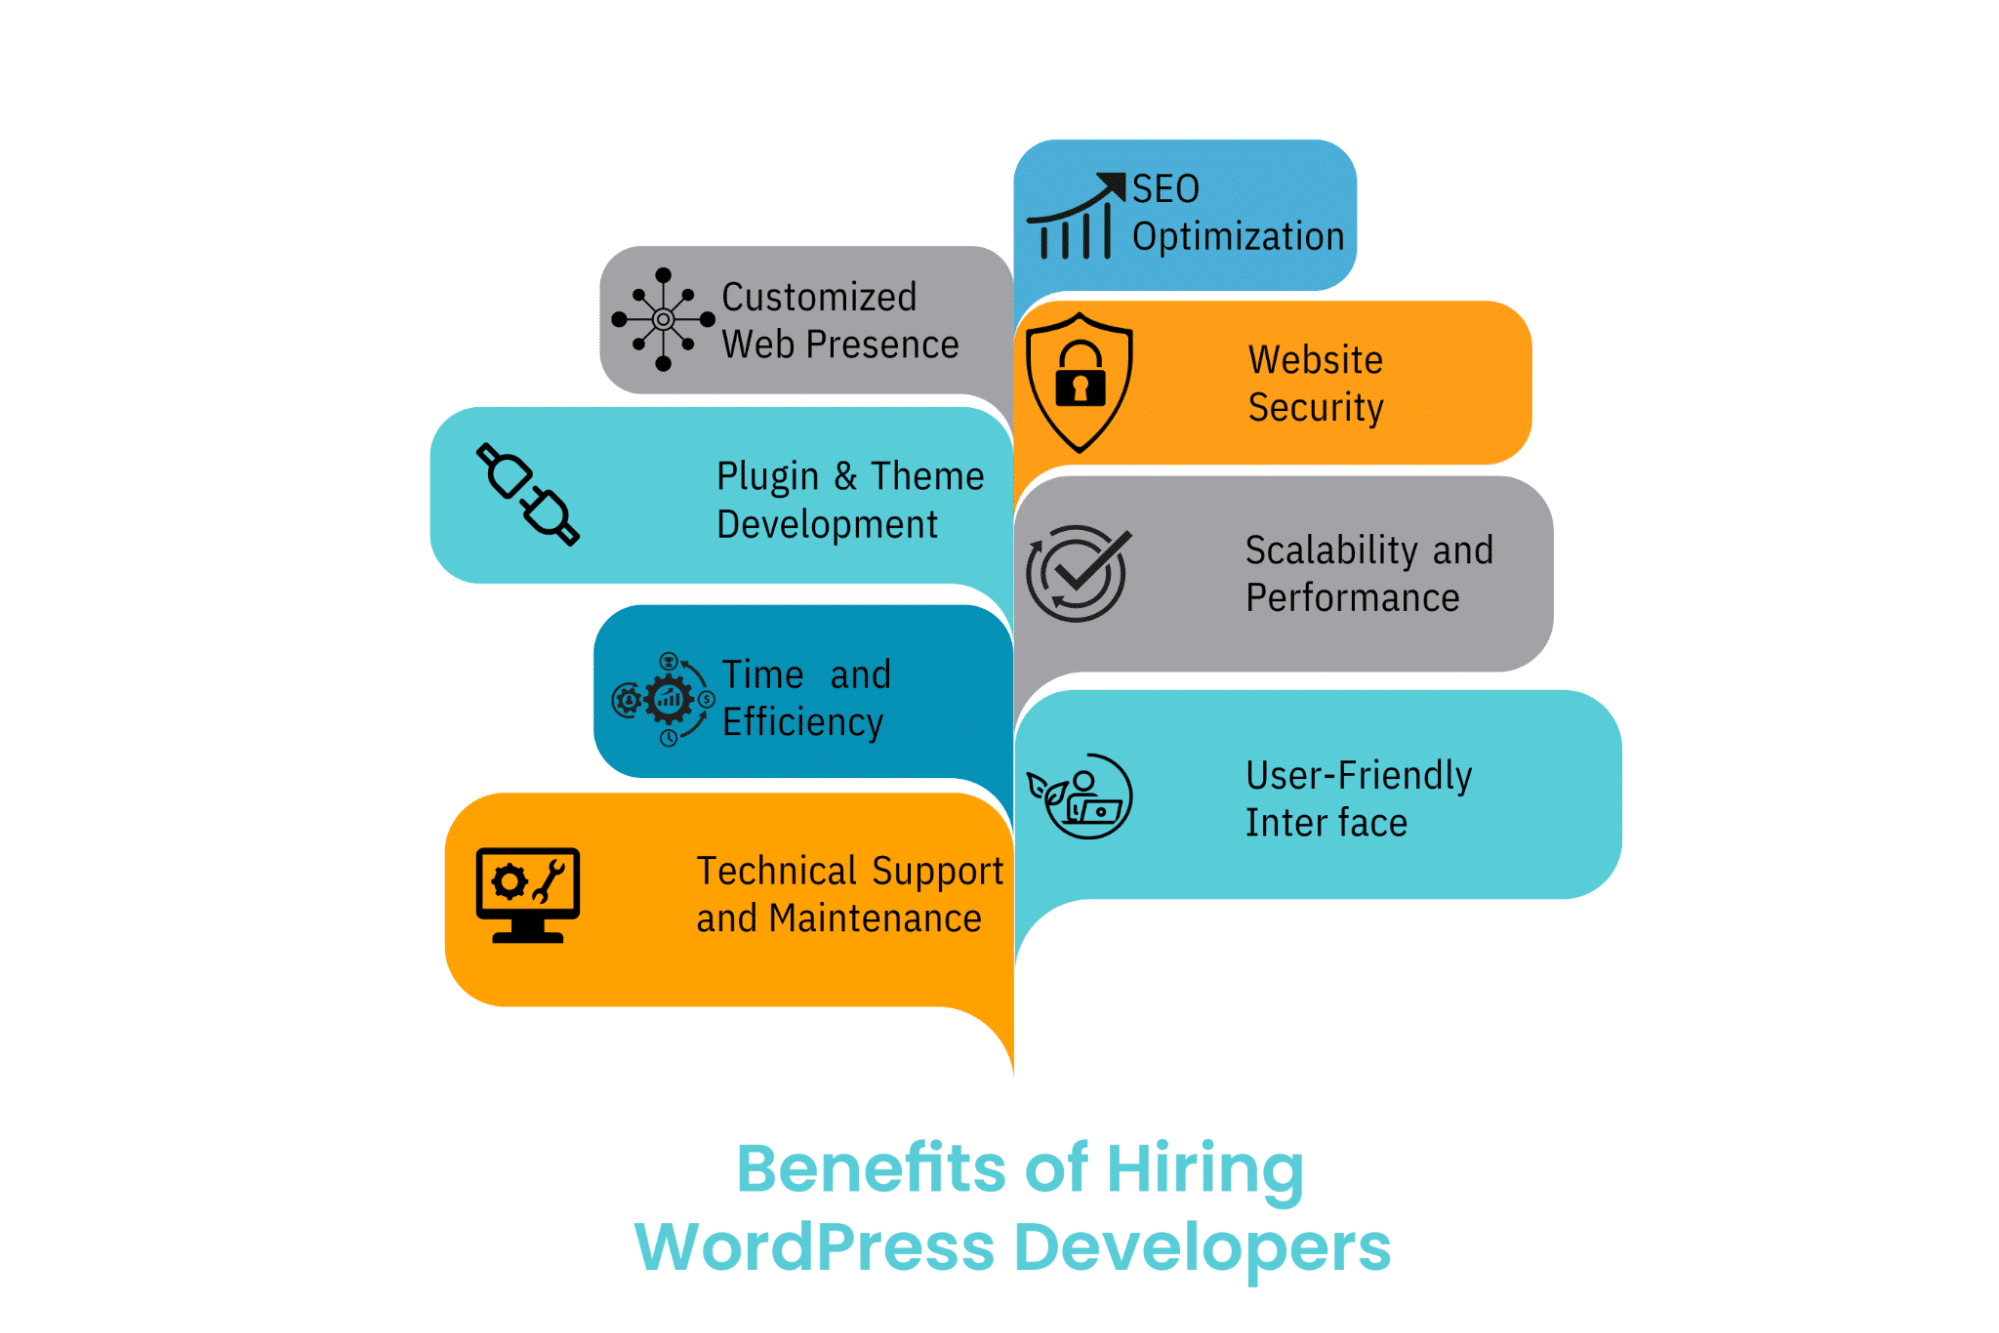 Advantages and Disadvantages of Hiring WordPress Developers